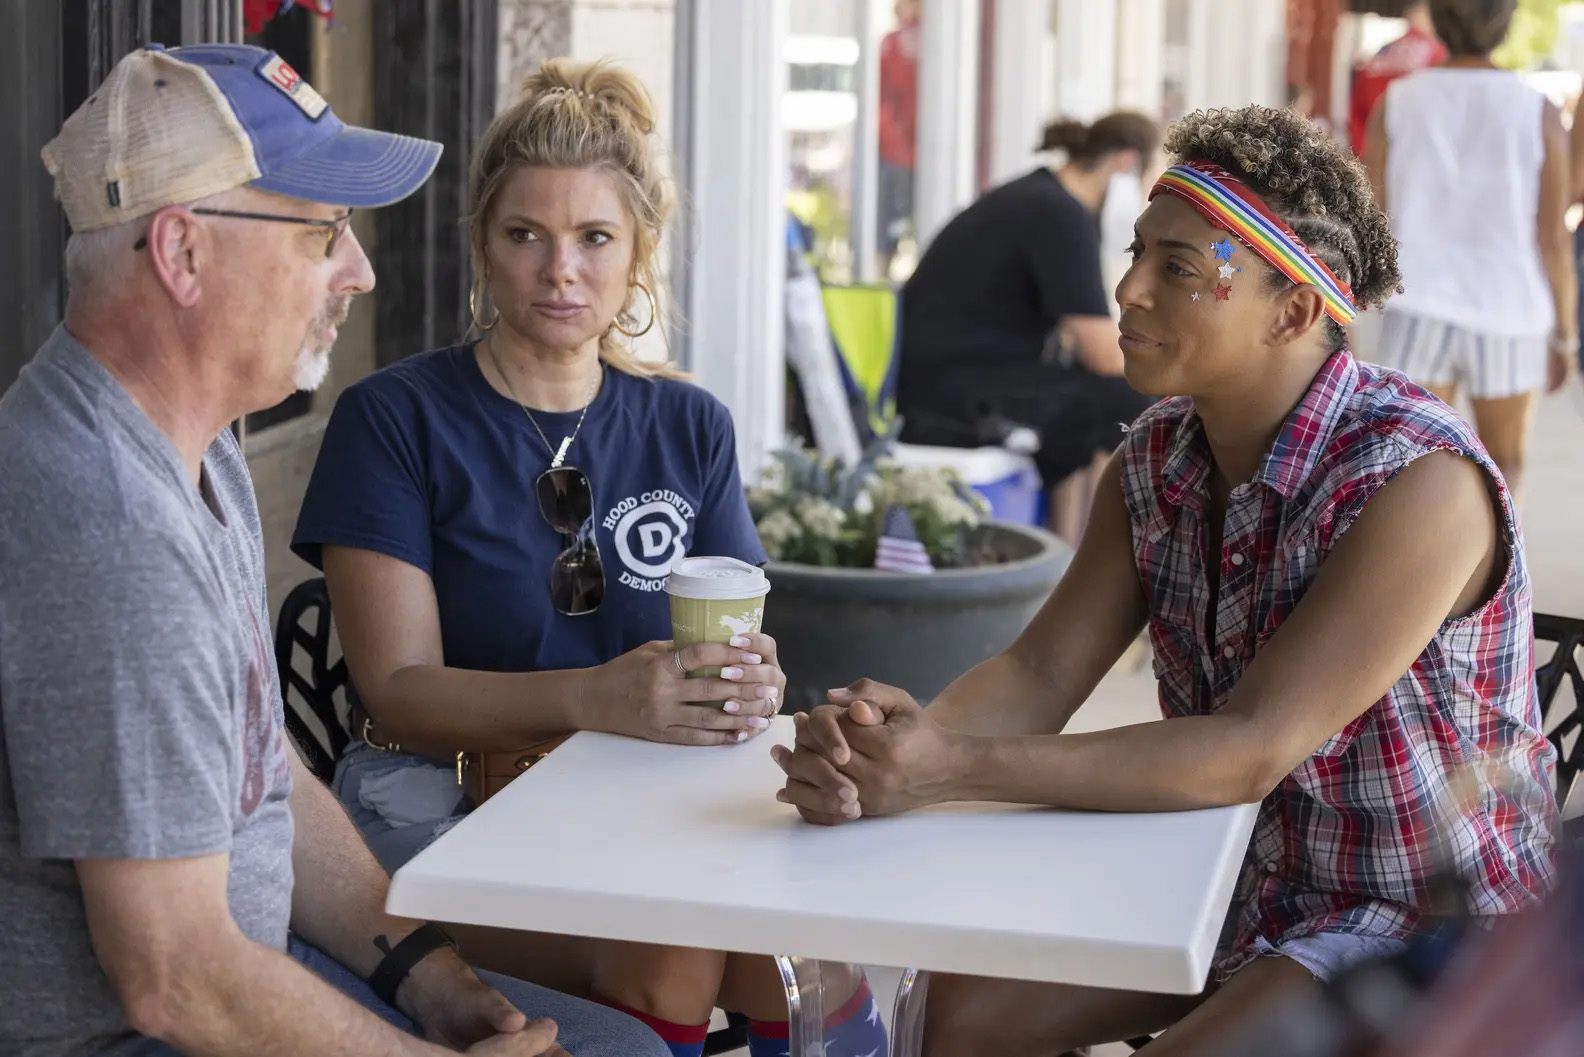 Three people sit at a table in discussion. From right, an older man speaks across the table to Shangela, a drag queen wearing a sleeveless plaid top, rainbow headband and star stickers around their eyes. In the middle a woman looks on.